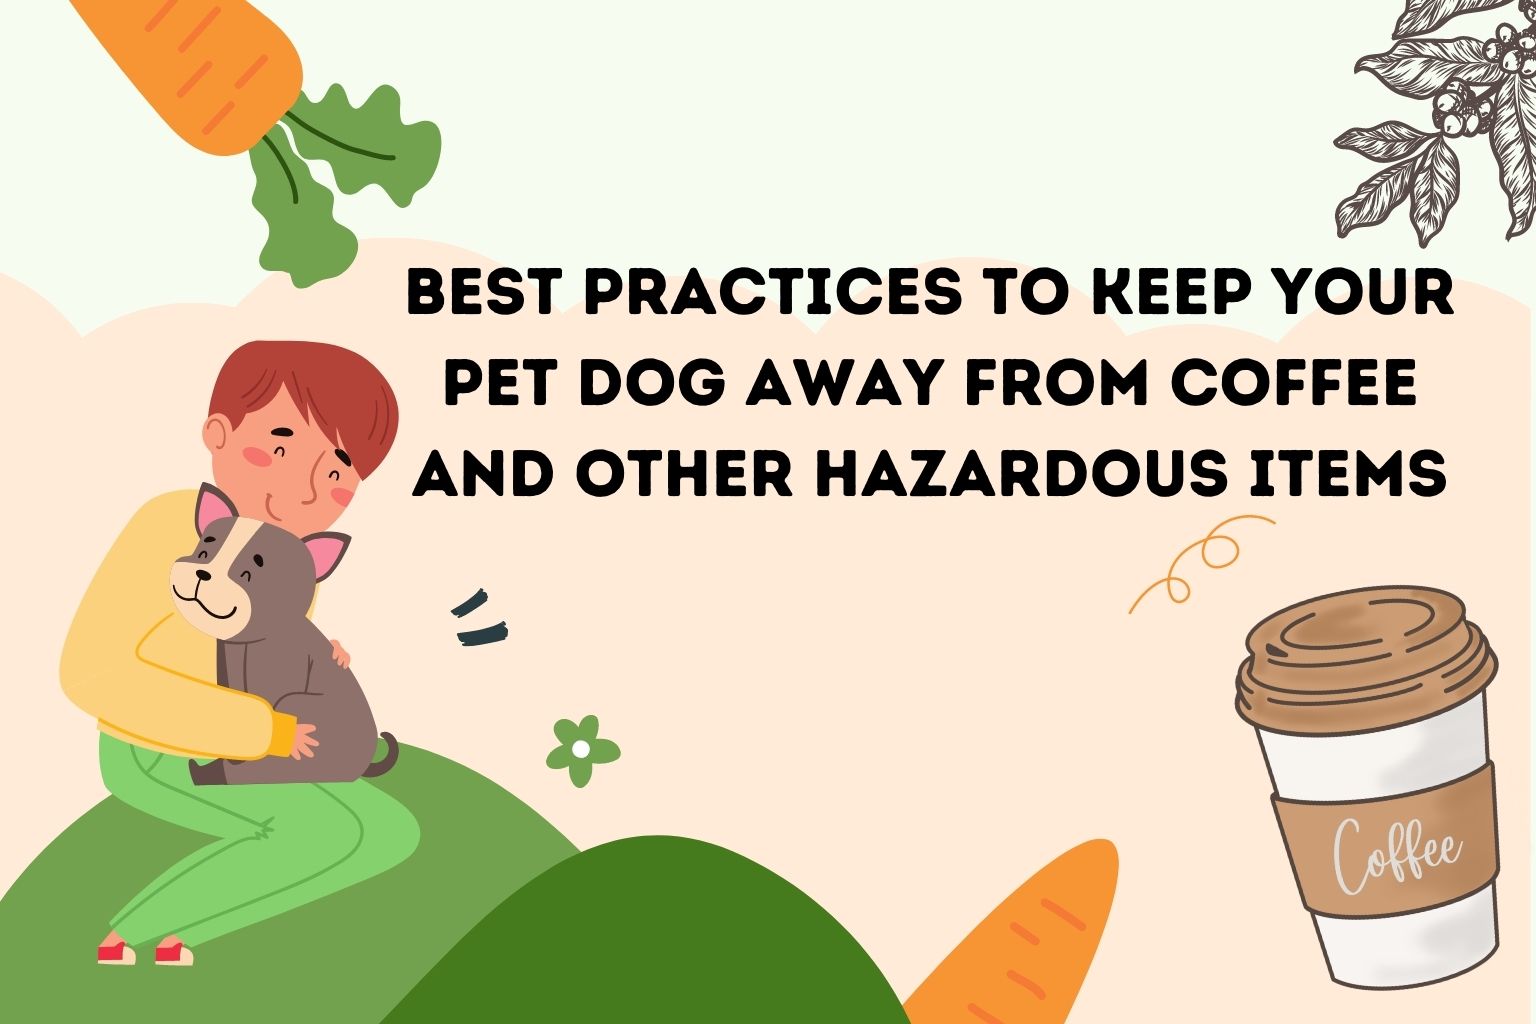 Best Practices to Keep Your Pet Dog Away from Coffee and Other Hazardous Items